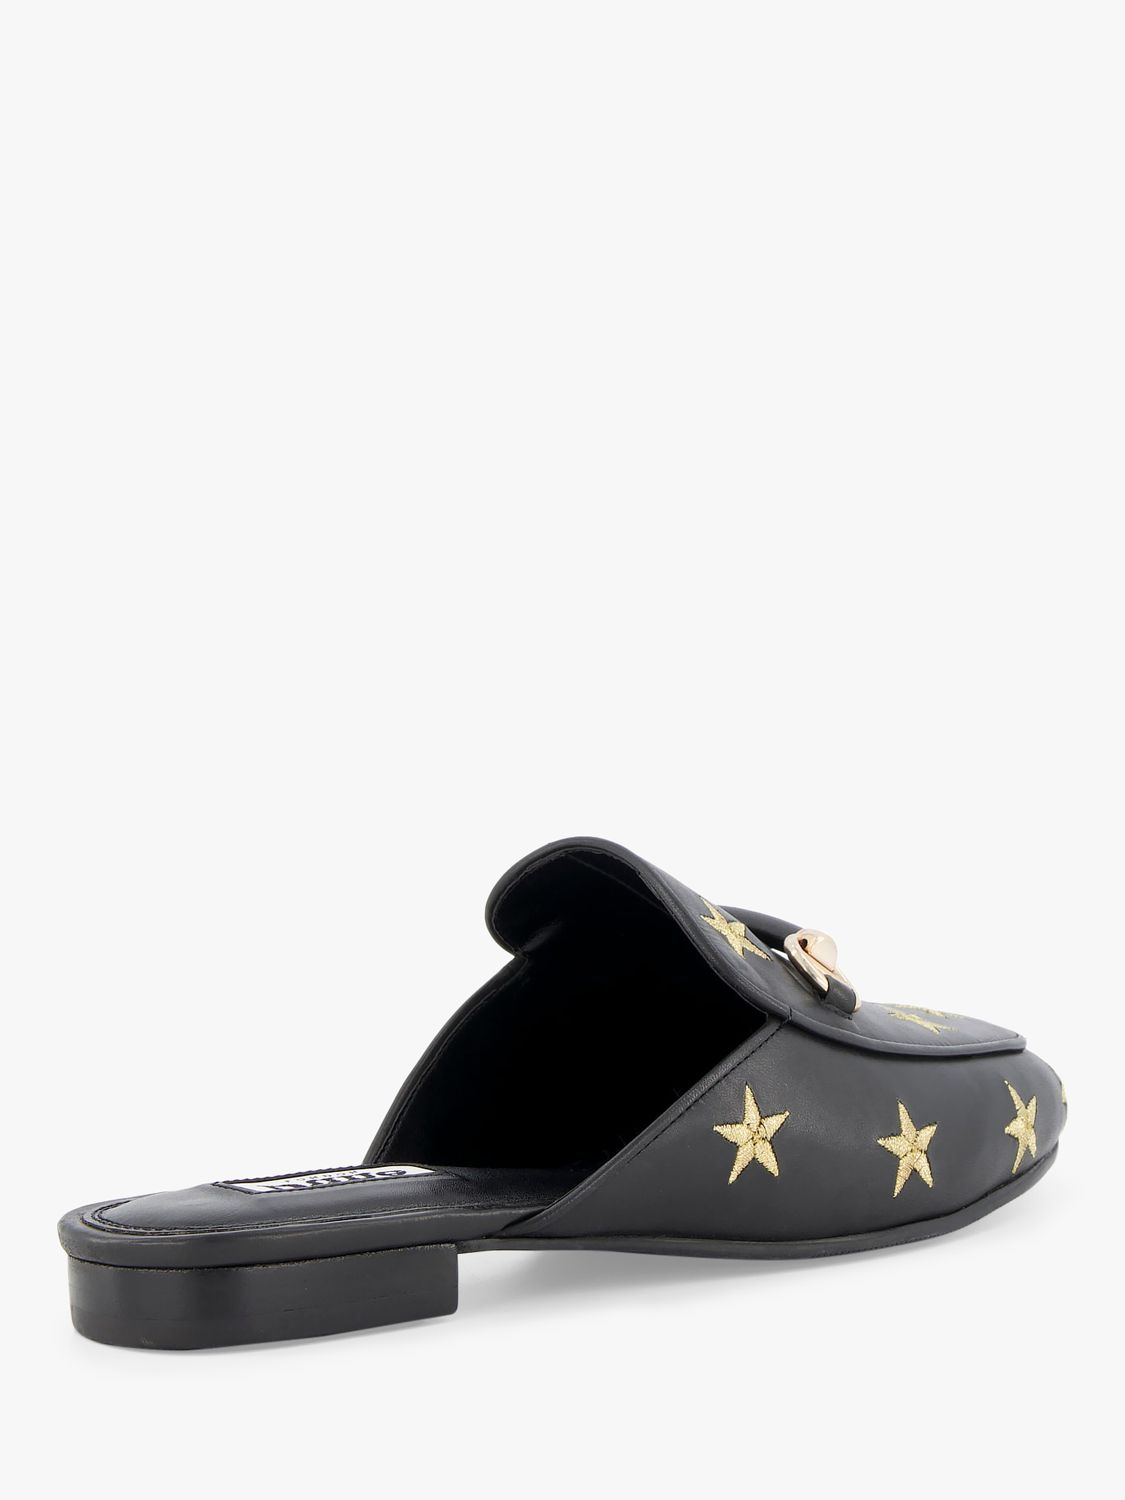 Buy Dune Galaxies Leather Loafers, Black Online at johnlewis.com